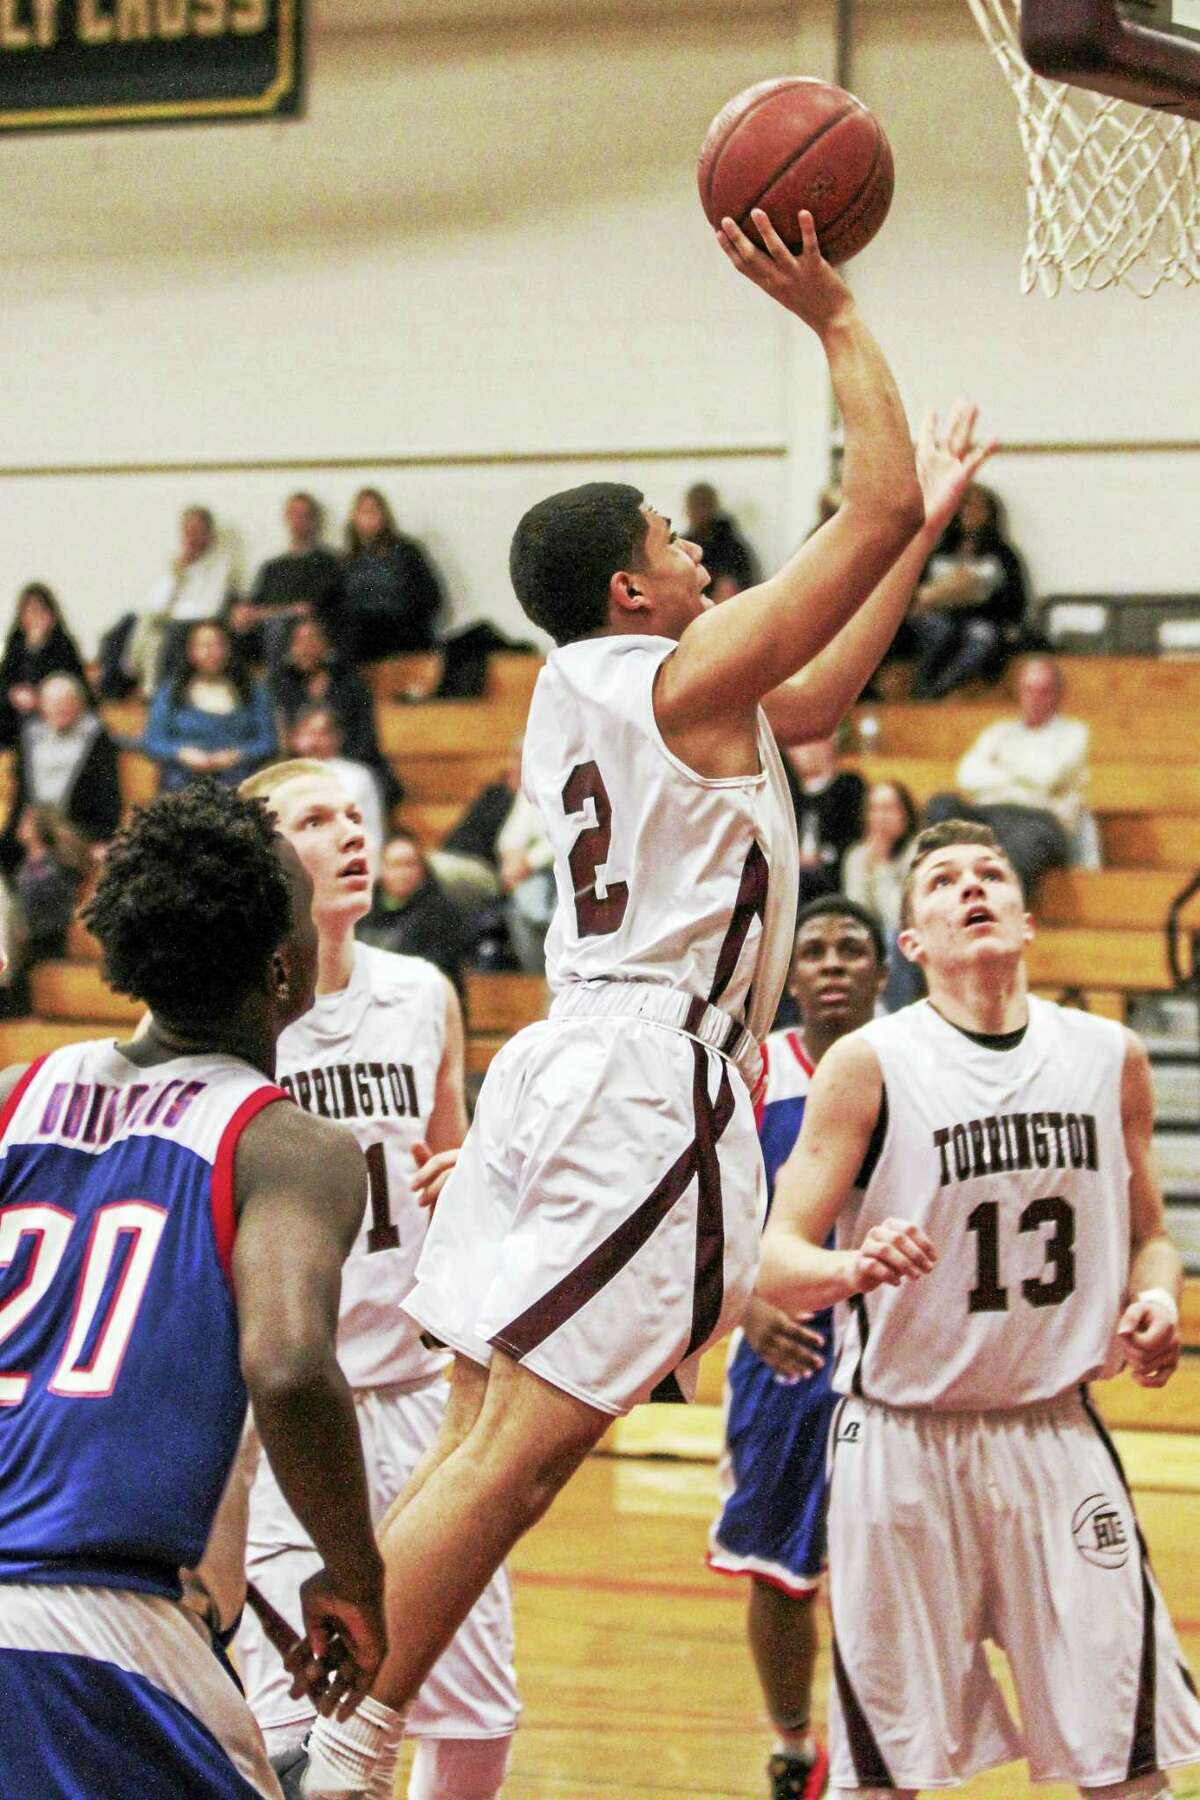 Stephon Dailey of Torrington goes up for a shot in his team’s loss to Crosby Friday night.